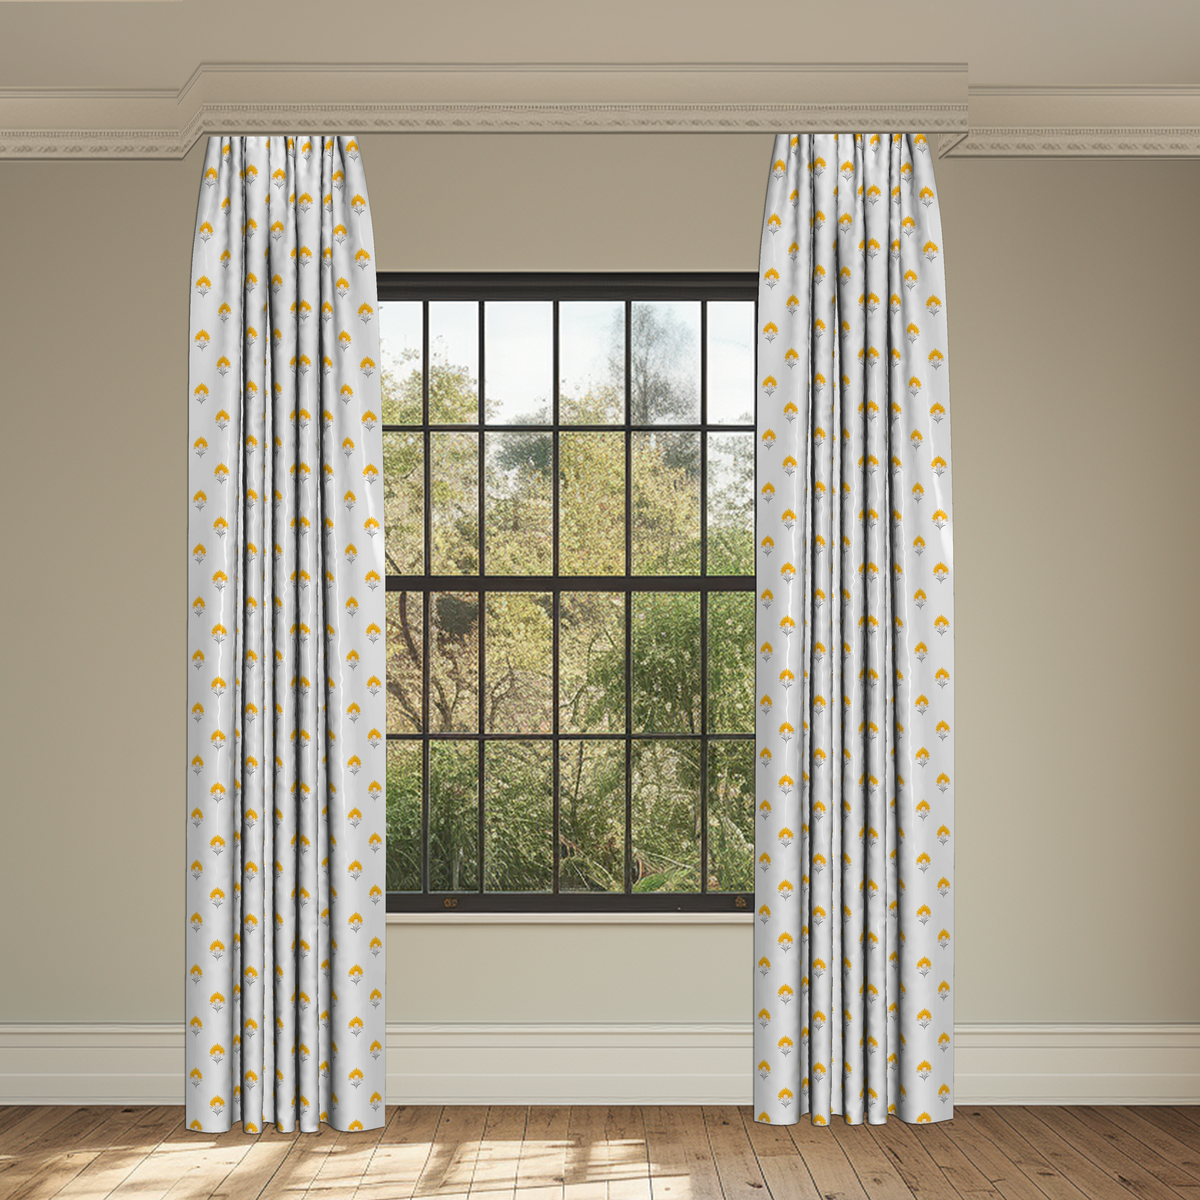 Adelaide Dandelion Made to Measure Curtains